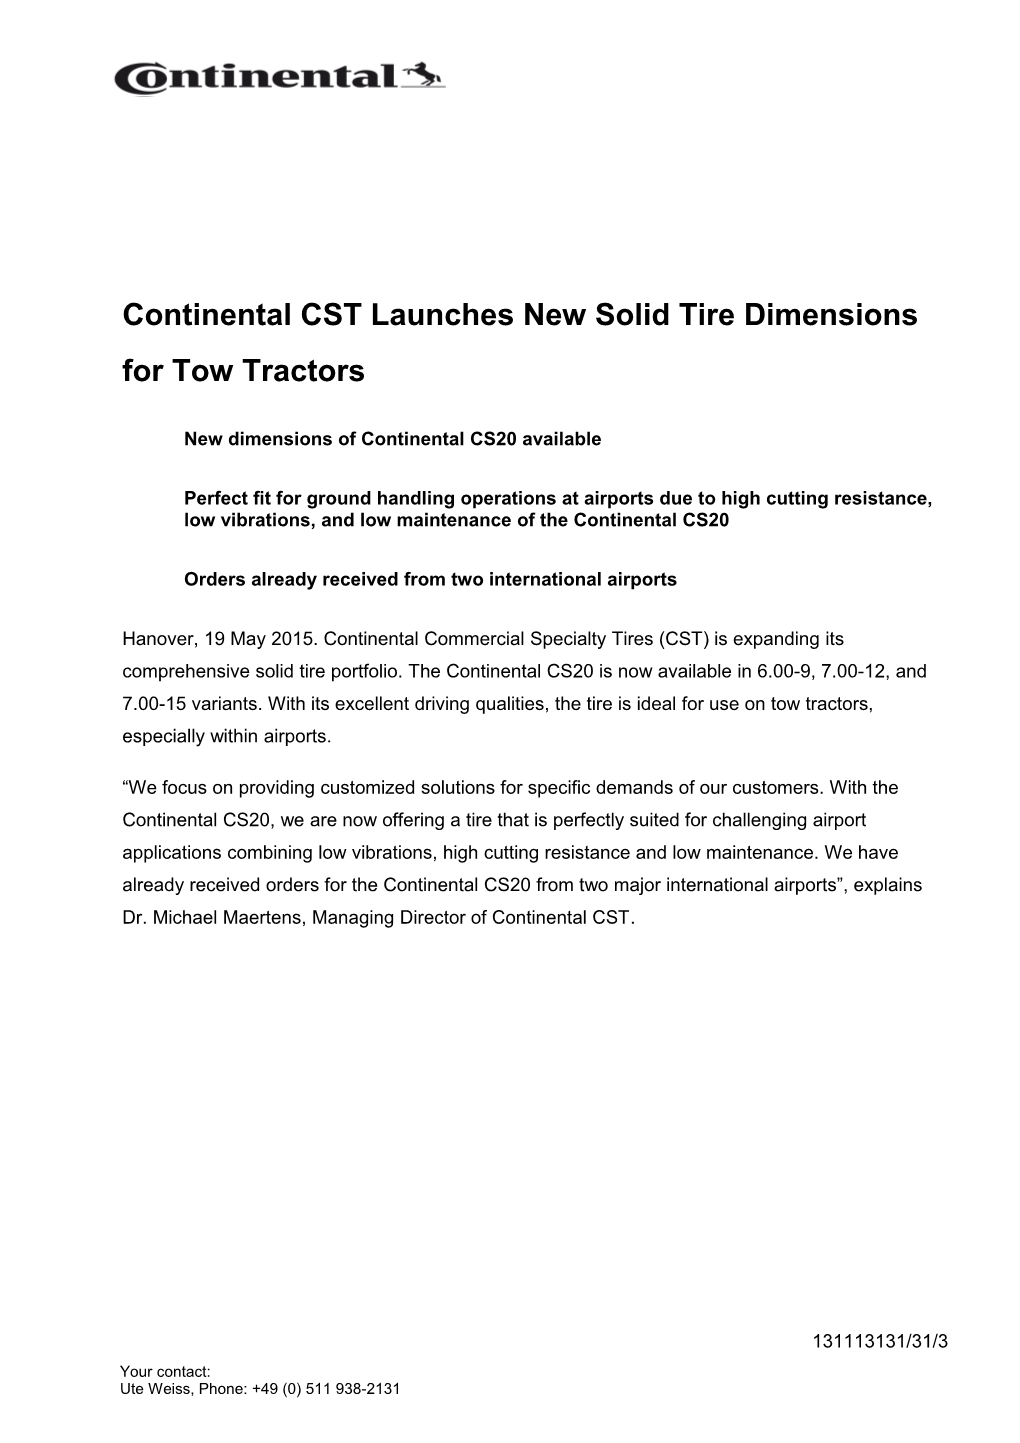 Continental CST Launches New Solid Tire Dimensions for Towtractors